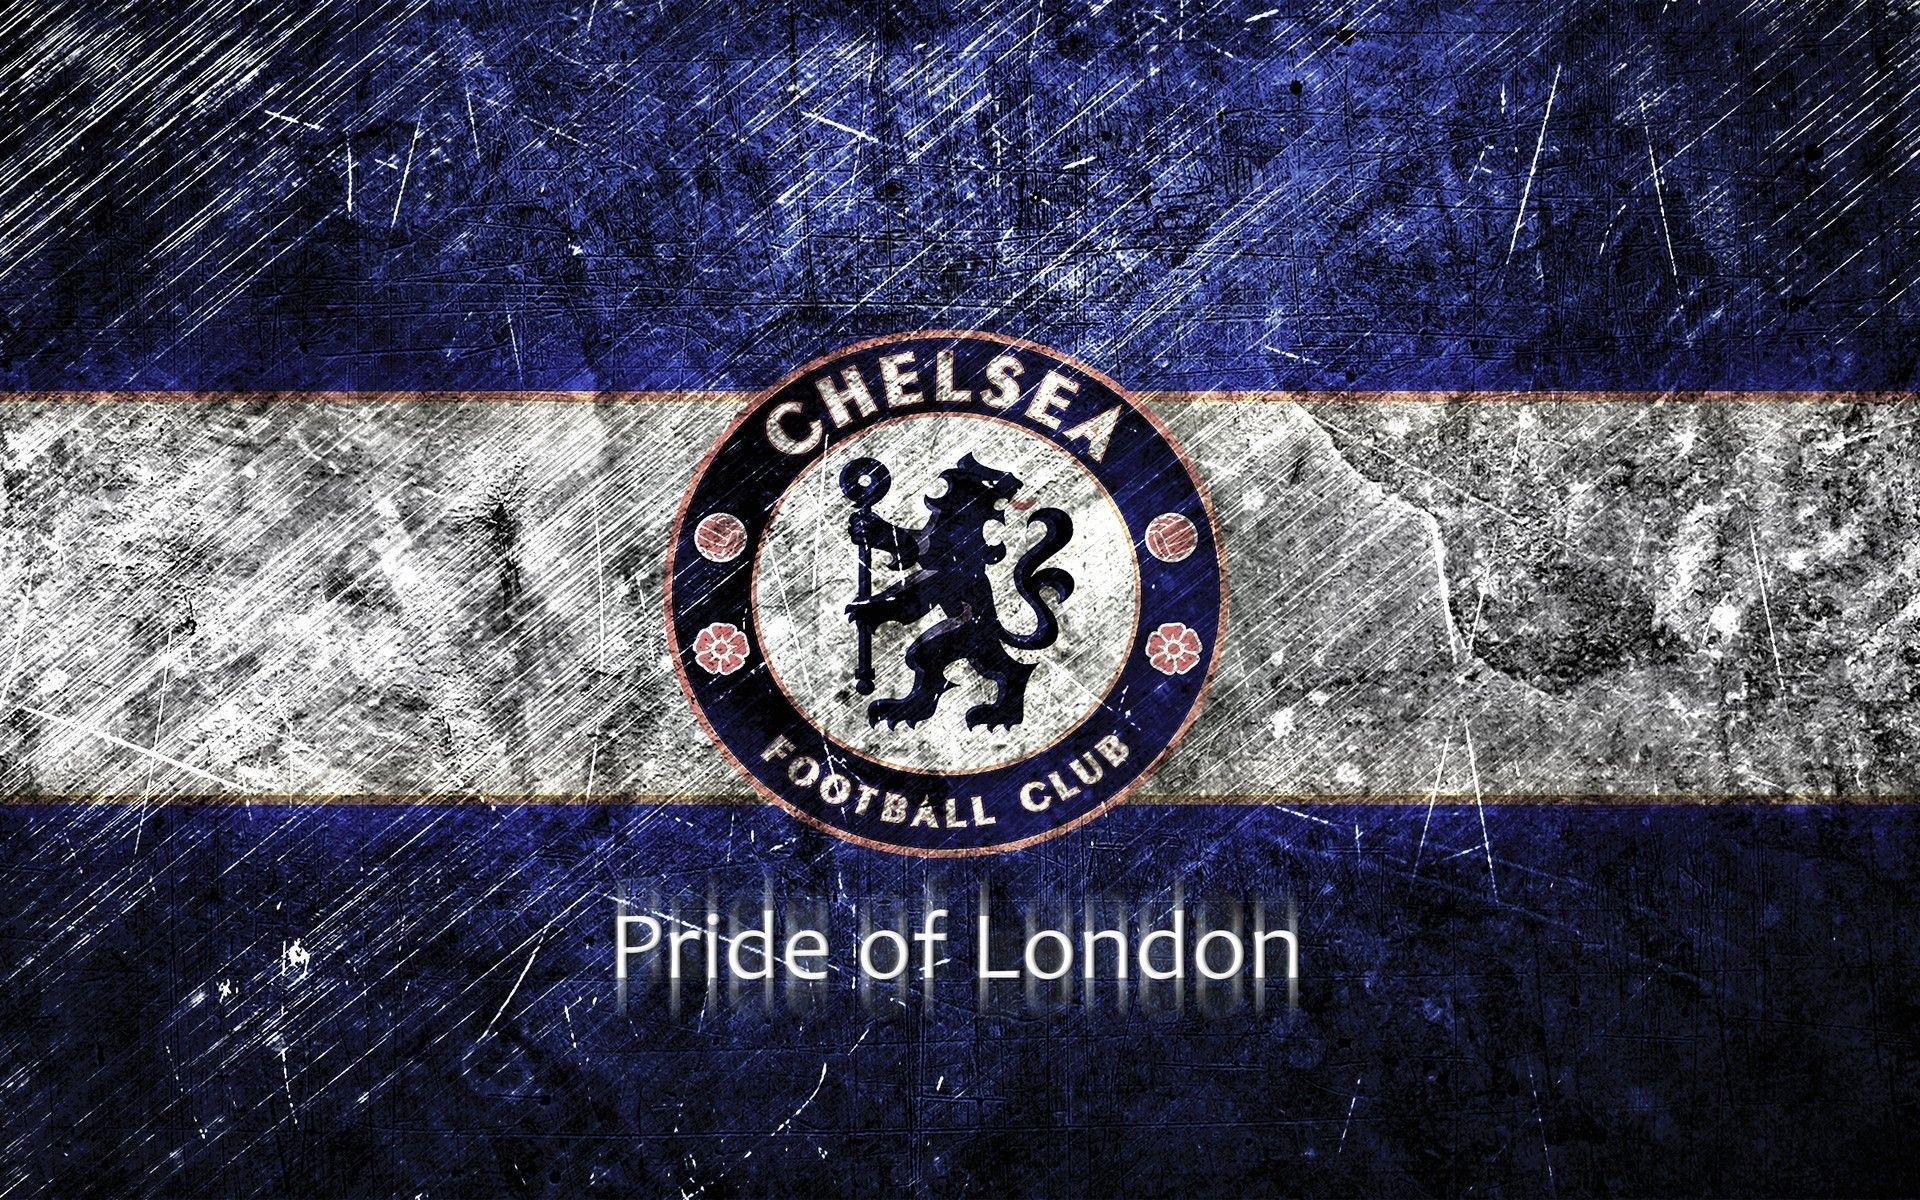 Chelsea Pride of London. Android wallpaper for free